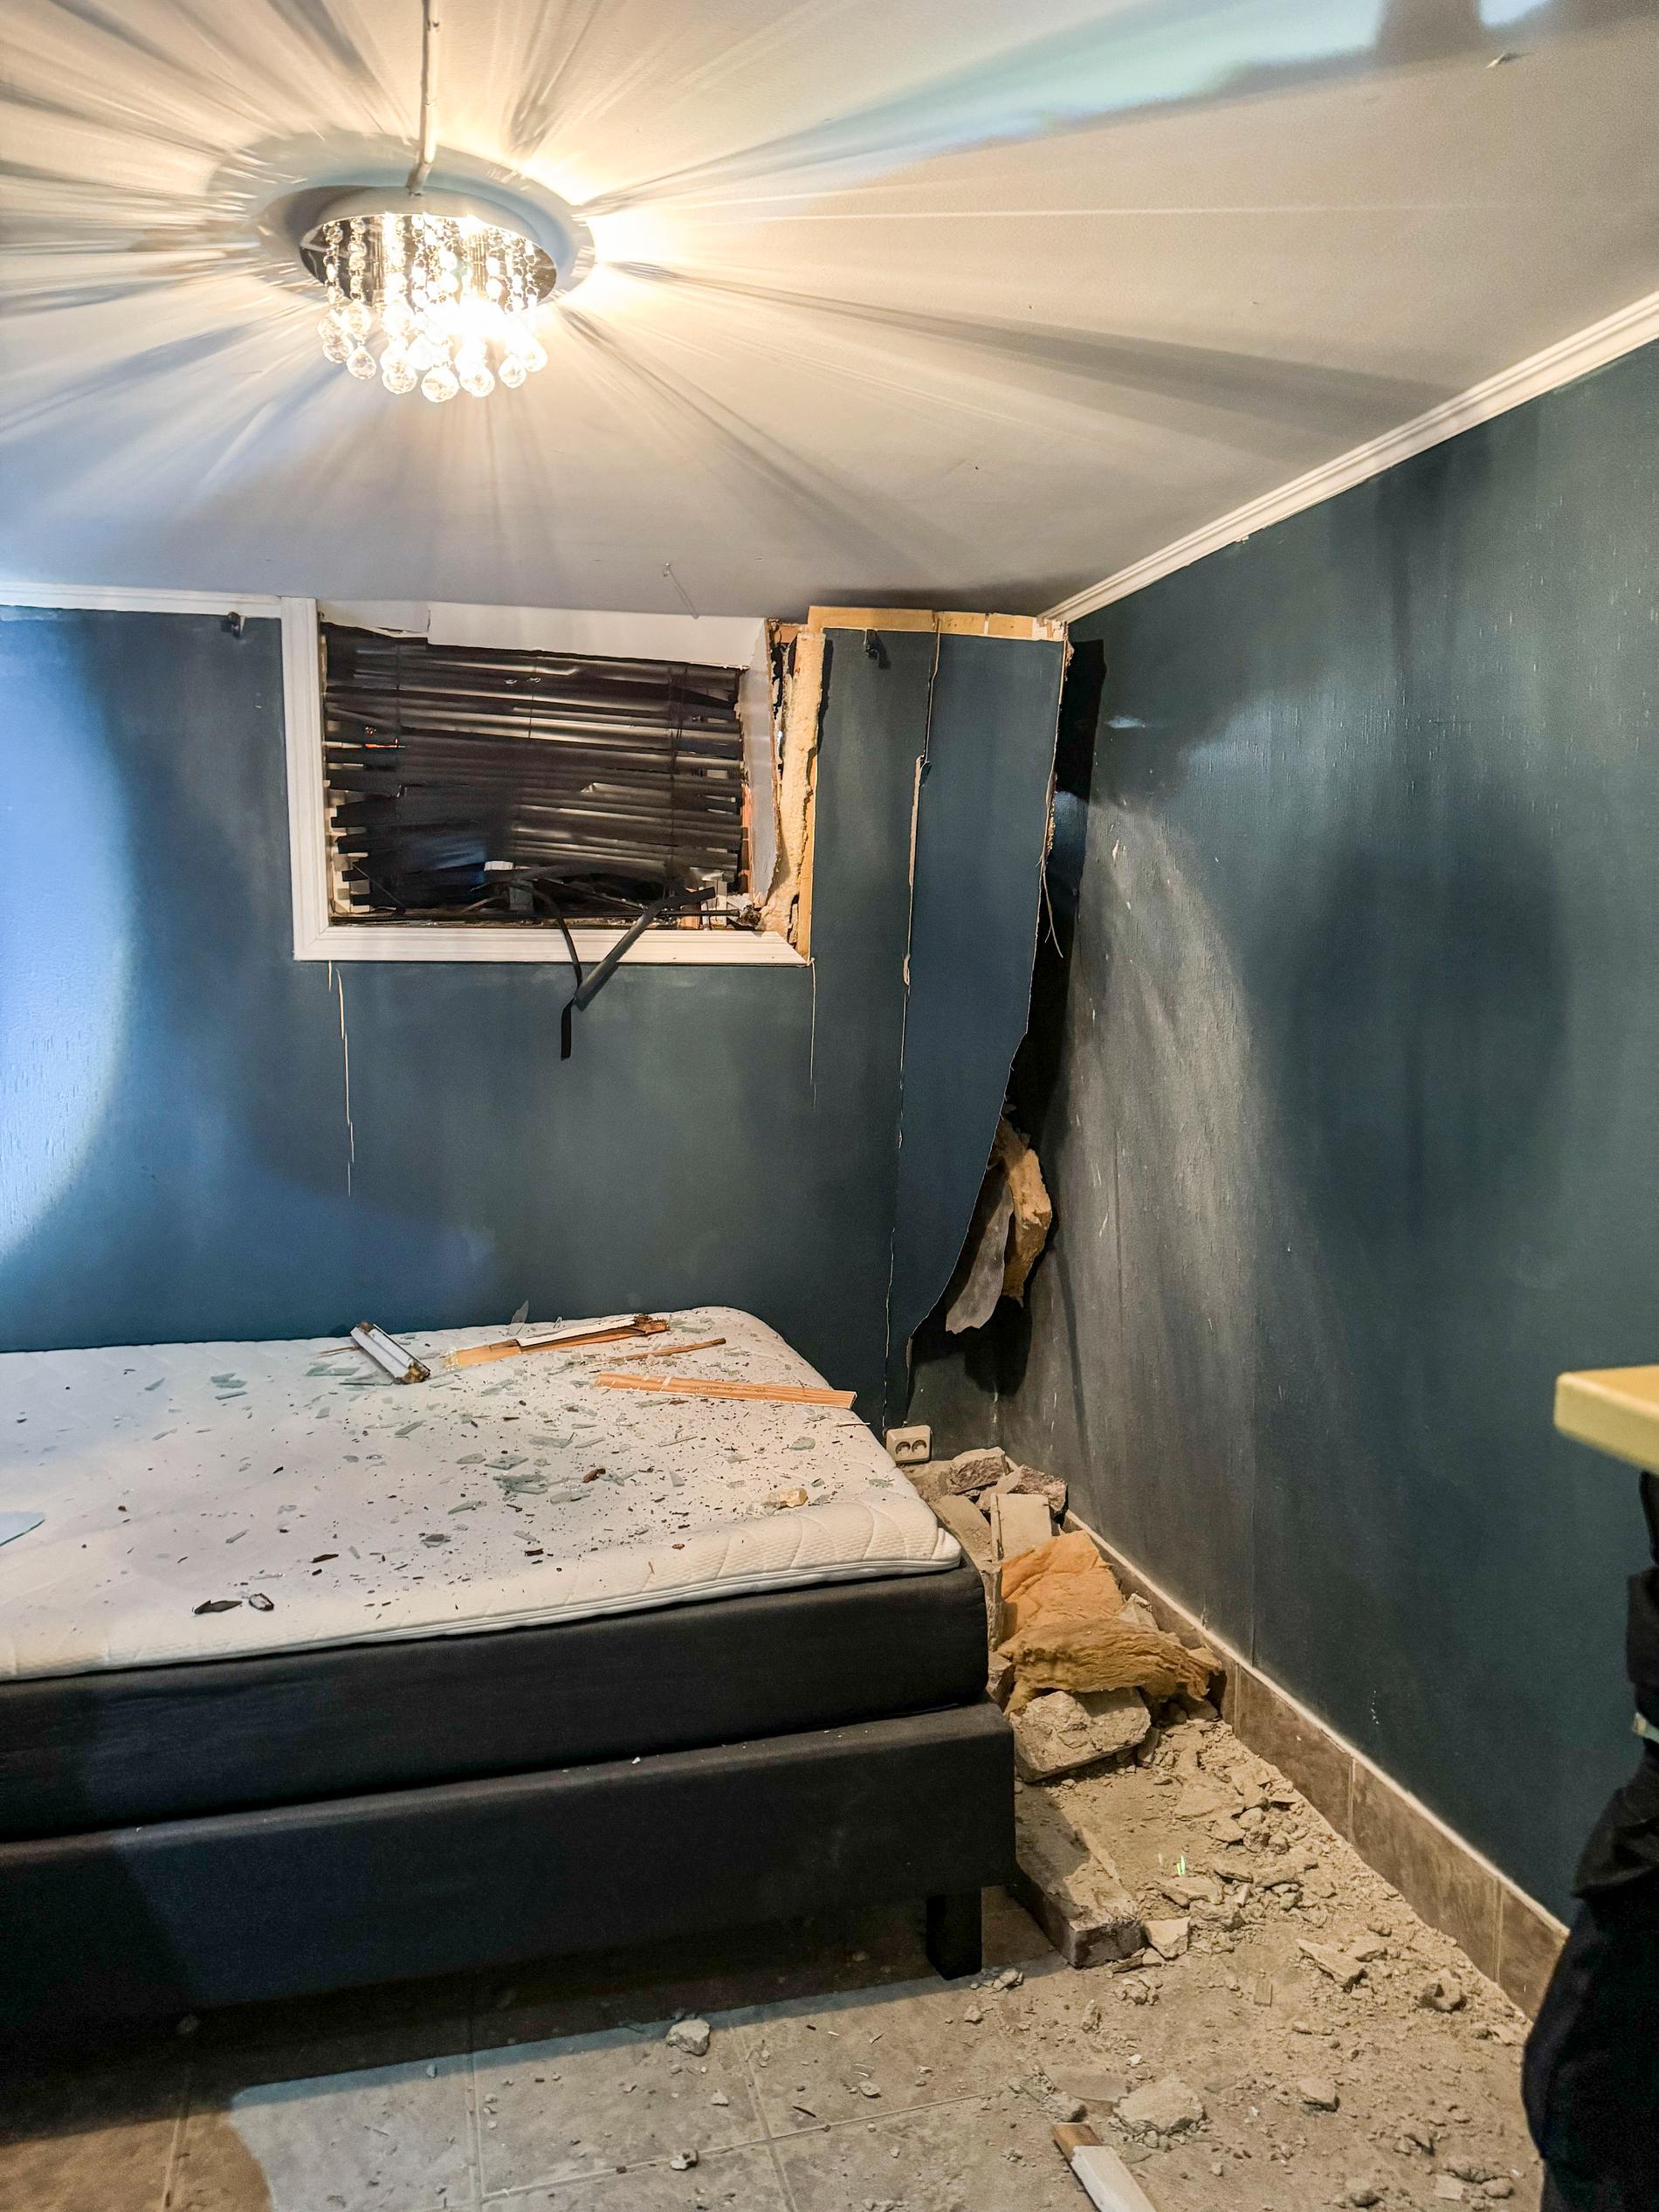 Hell in an Accident: The homeowner is happy because no one was sleeping here when the accident happened. 